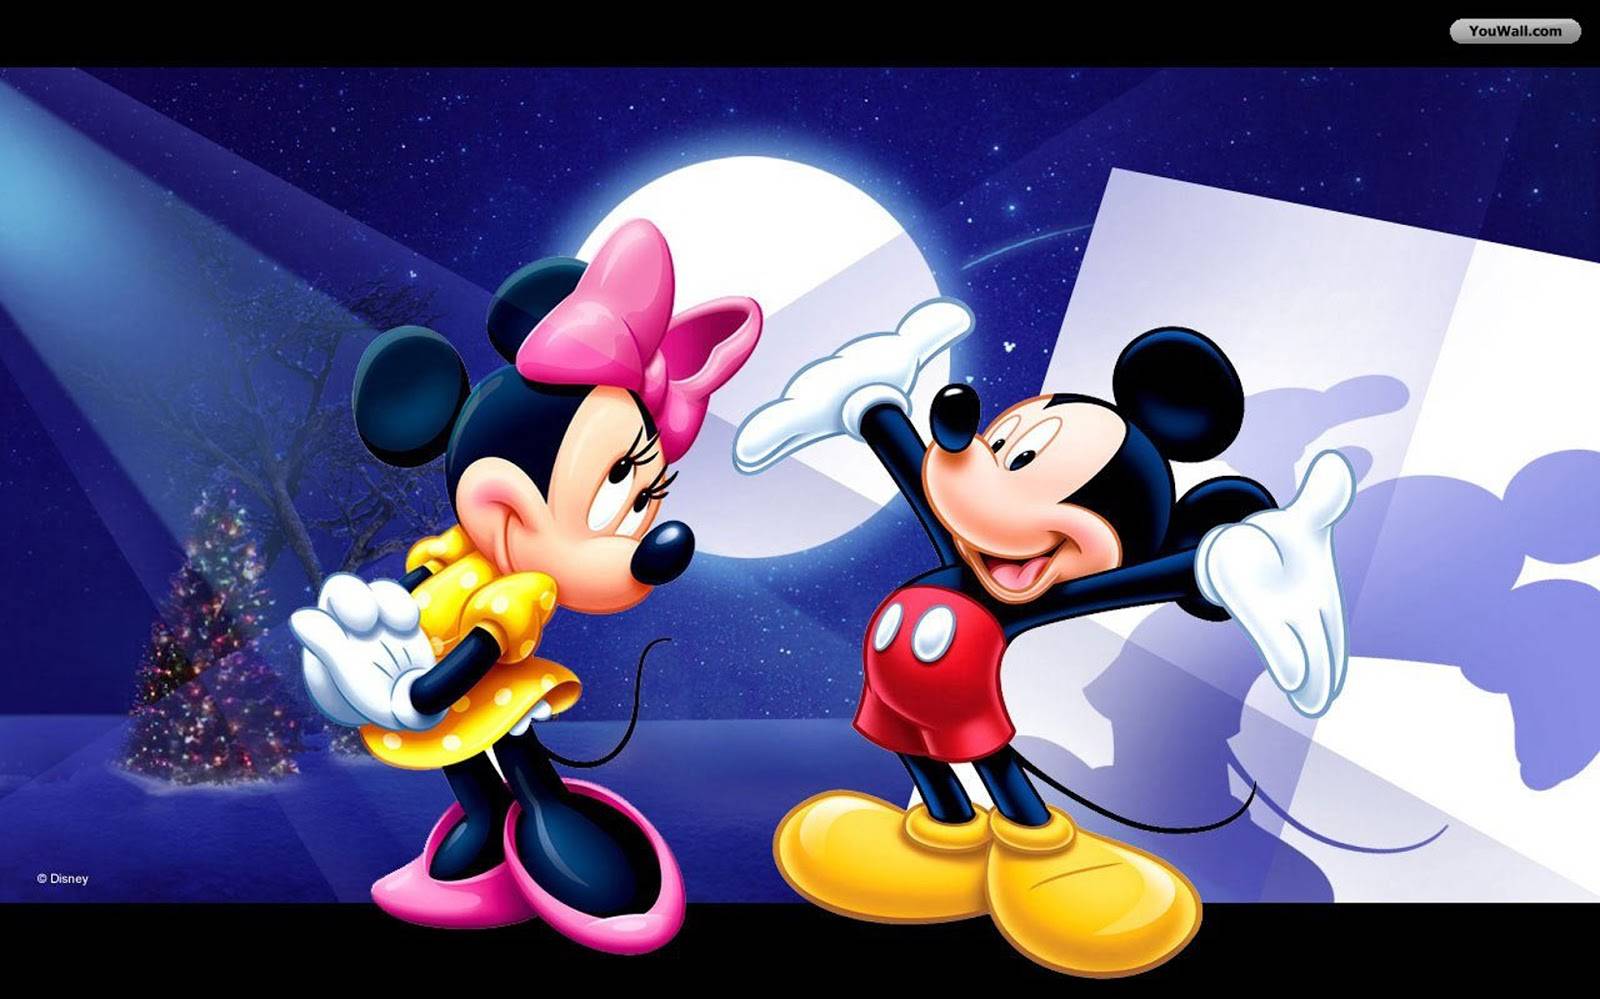 Mickey Mouse And Minnie Love Couple Wallpaper Hd : Wallpapers13.com